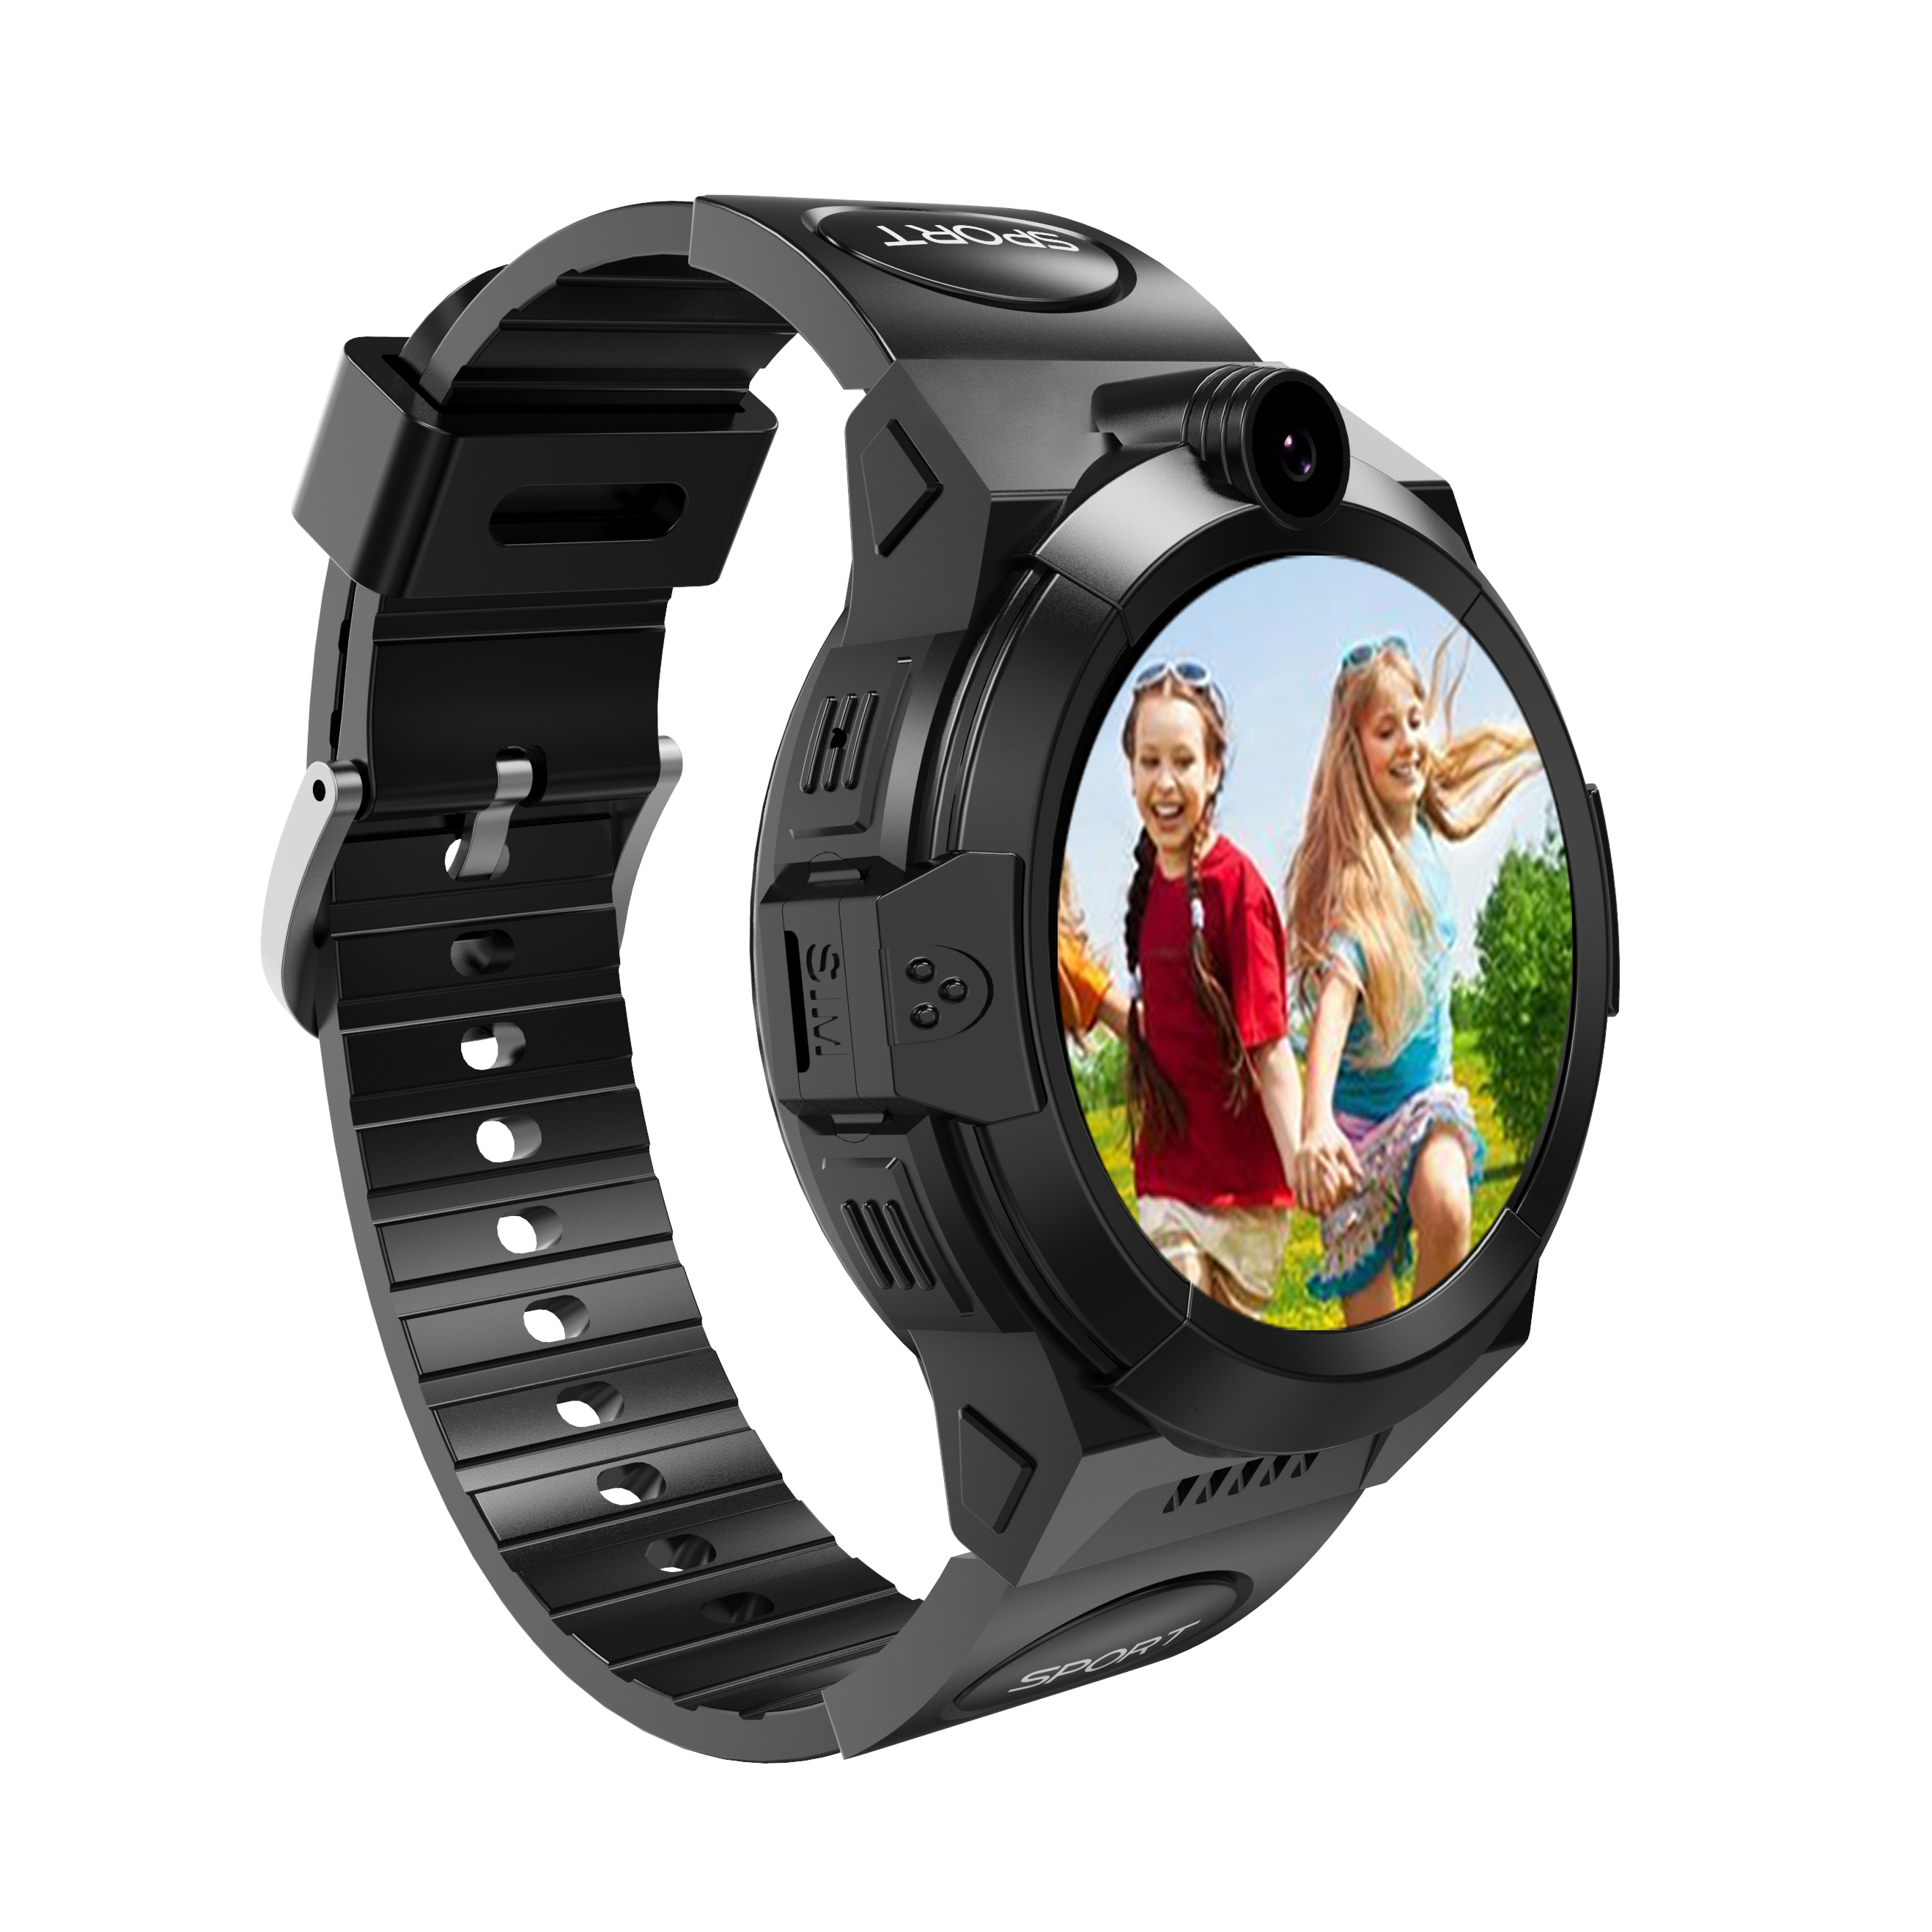 4G Waterproof Kids Wearable GPS Tracker with Live Map Location D38